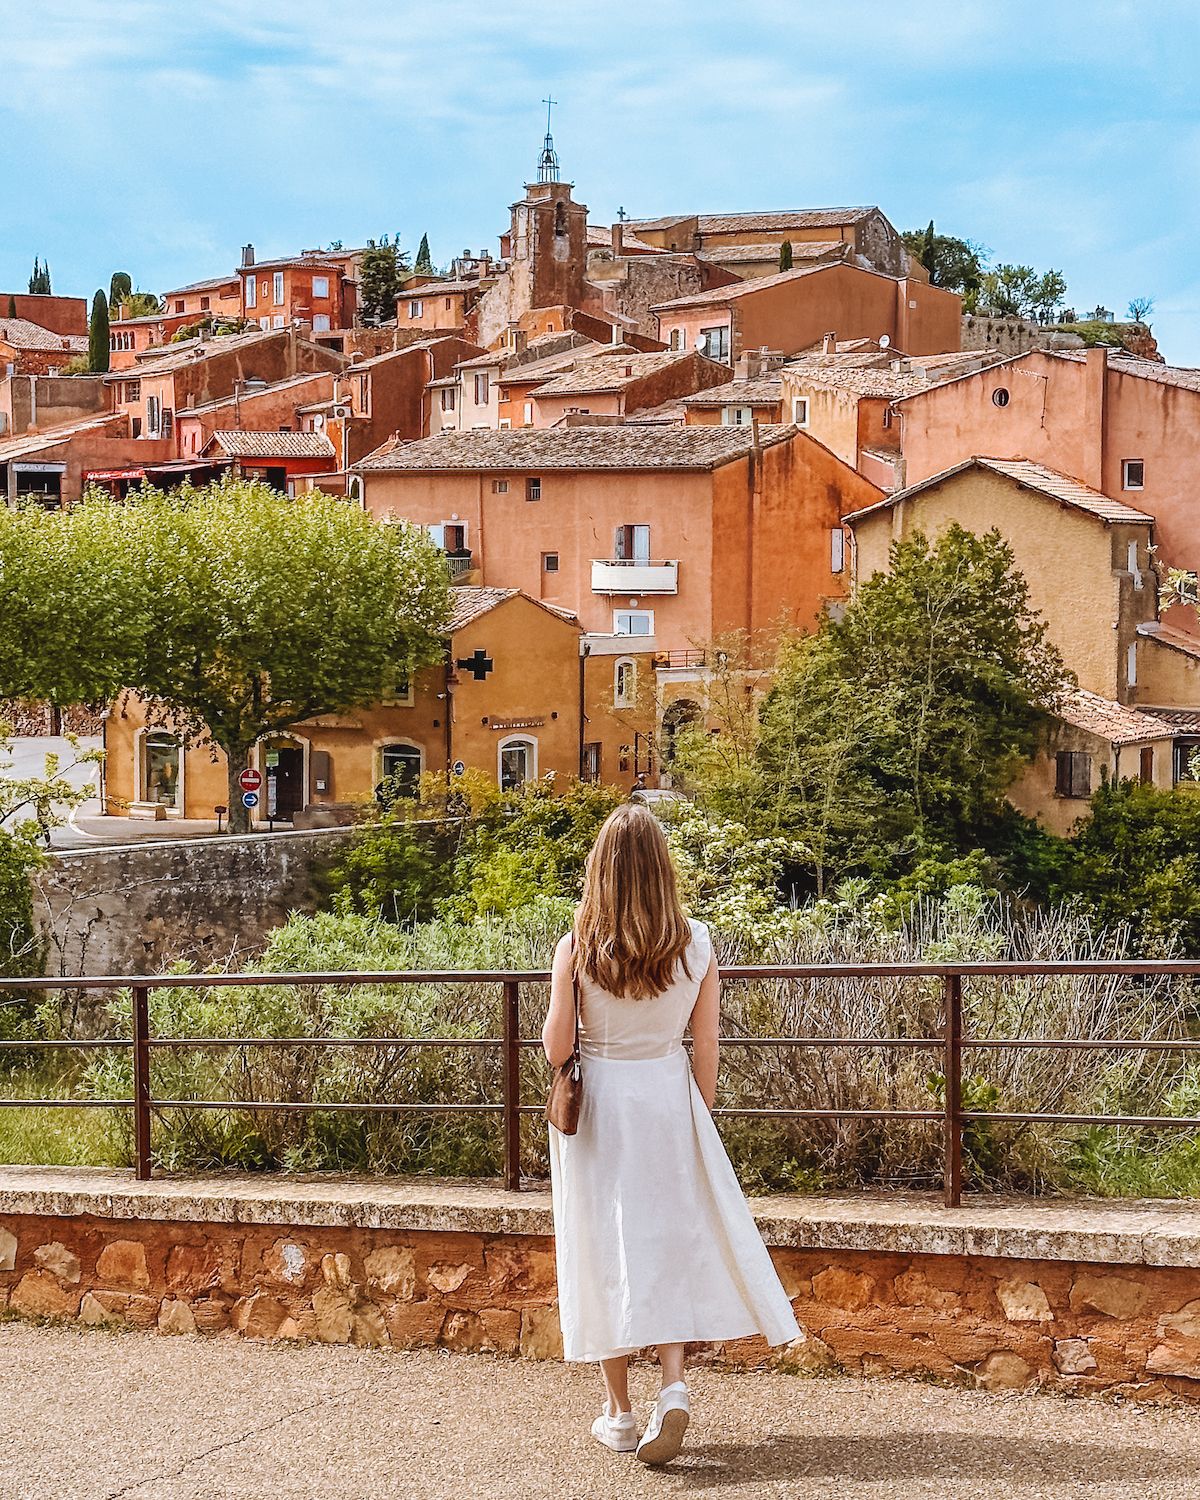 Blonde girl in white dress looking at ochre coloured buildings in the village of Roussillon